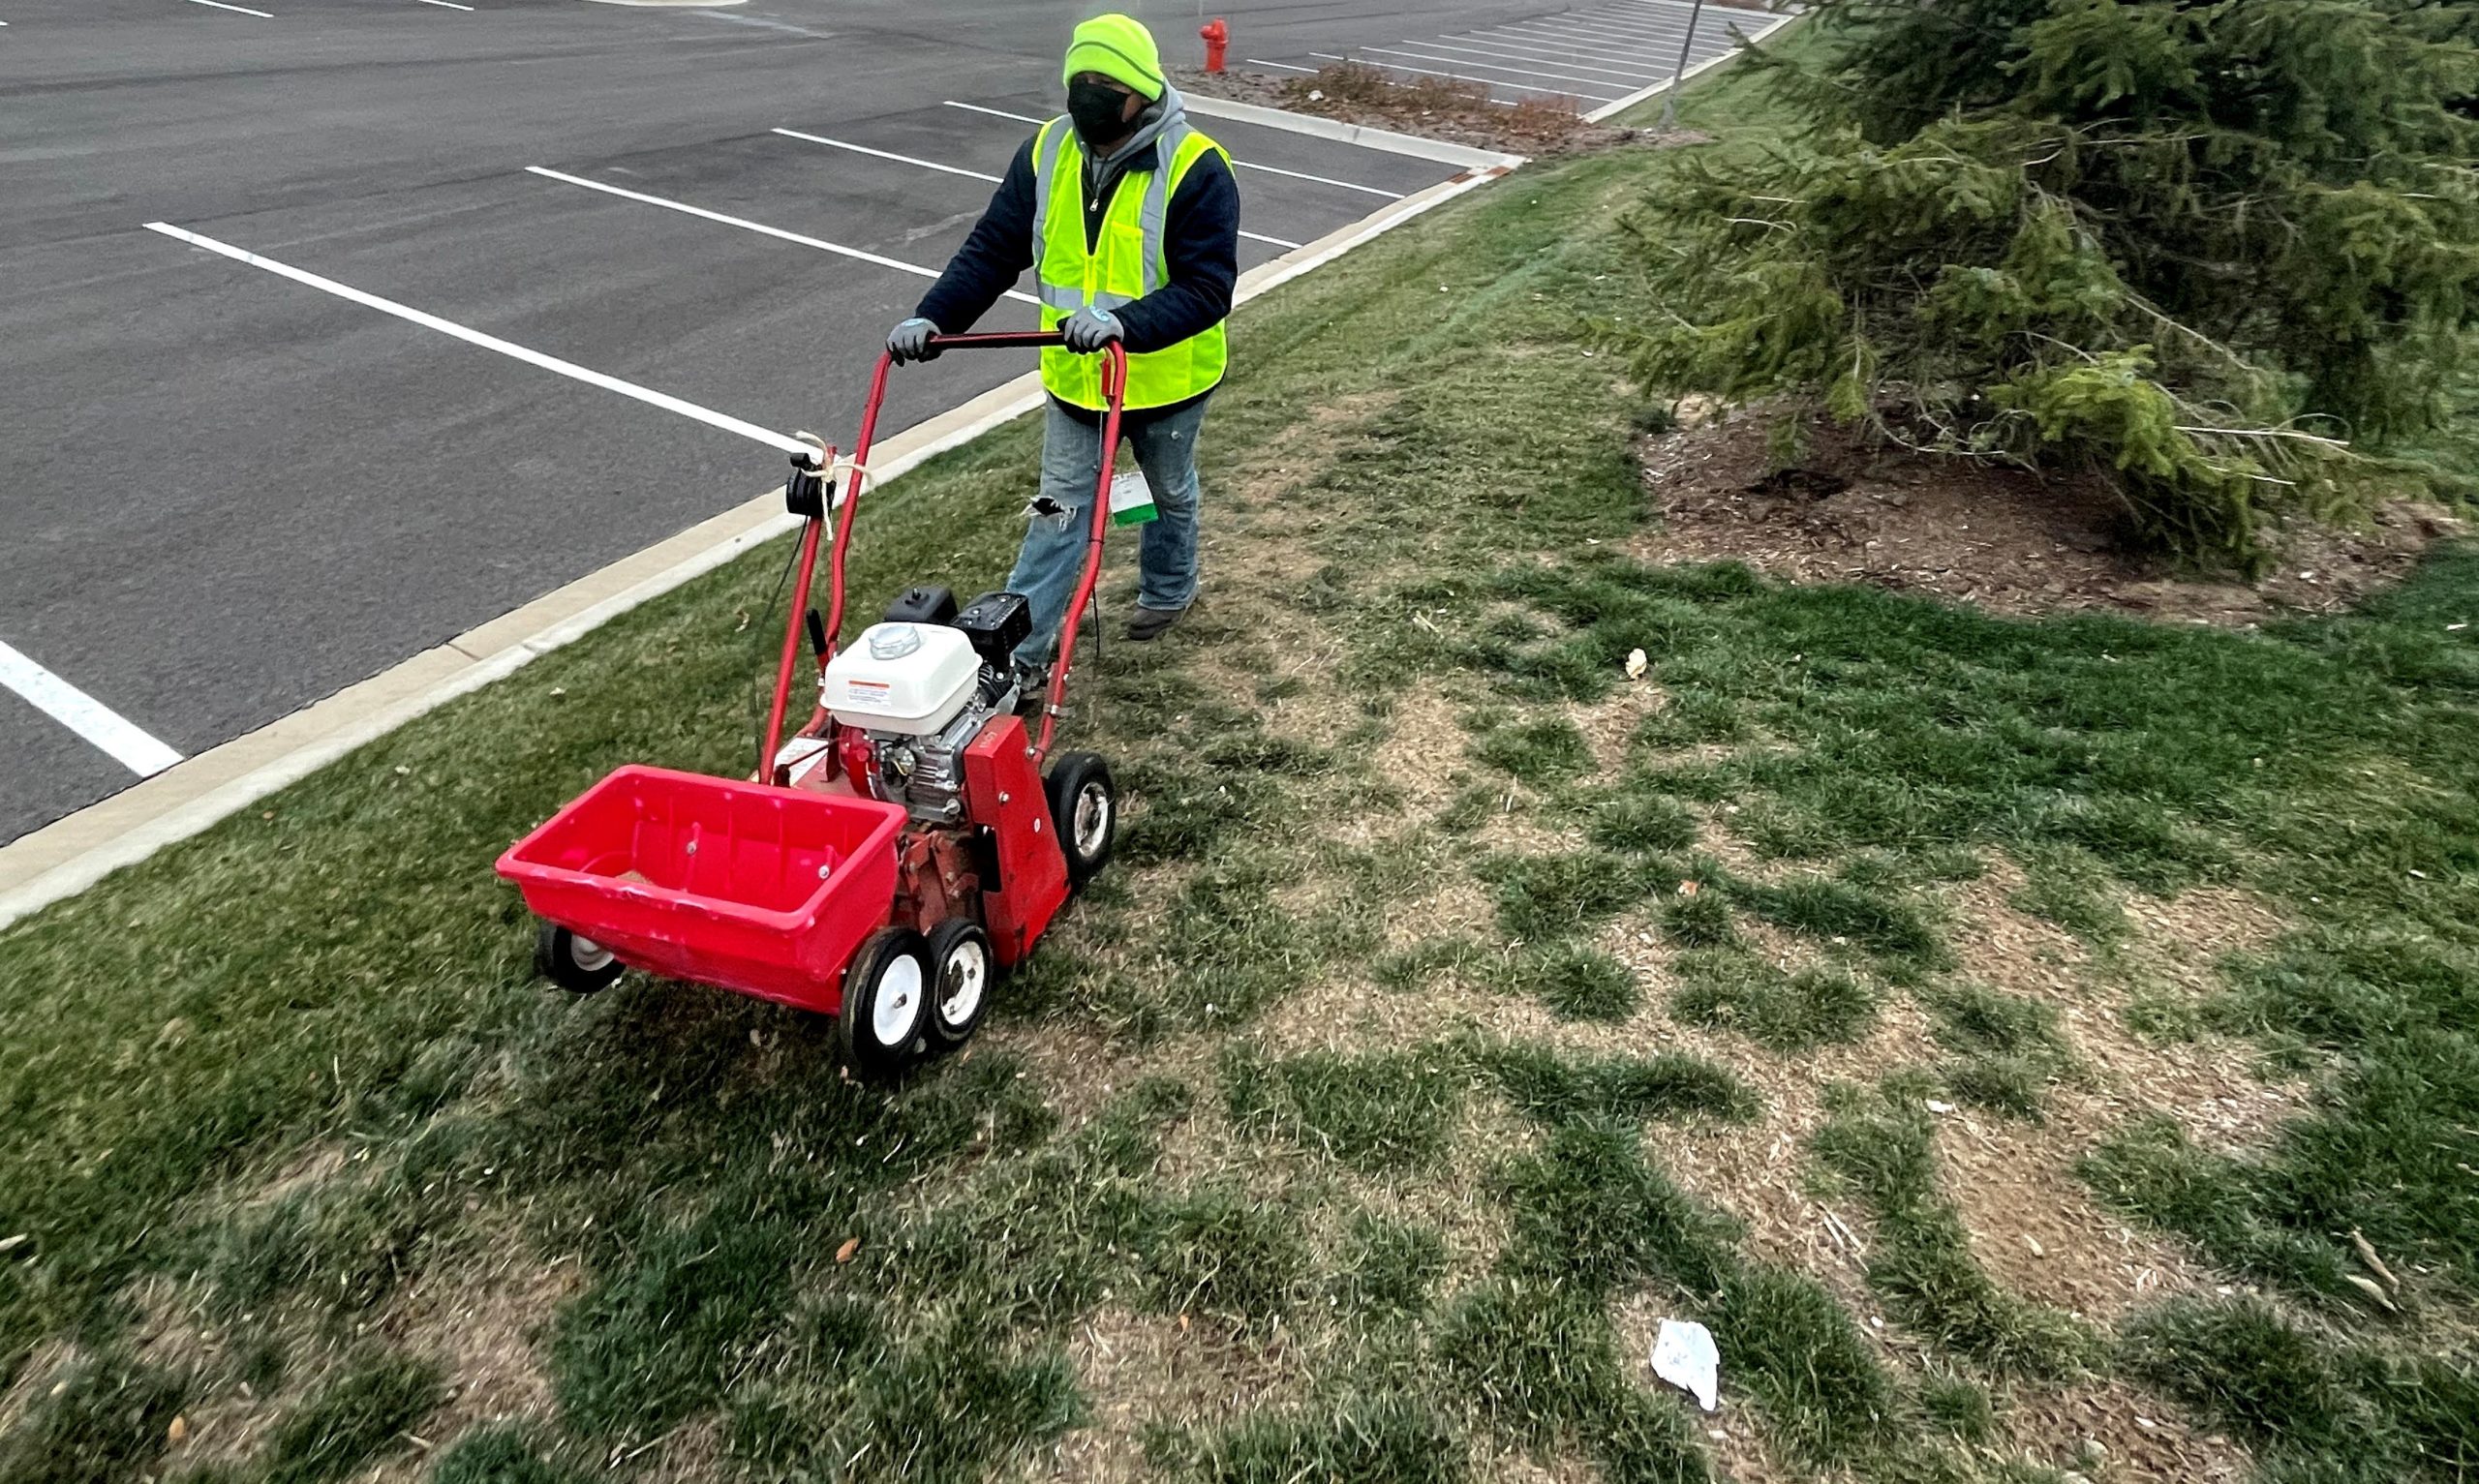 Slit-seeding with a special machine helps repair lawns